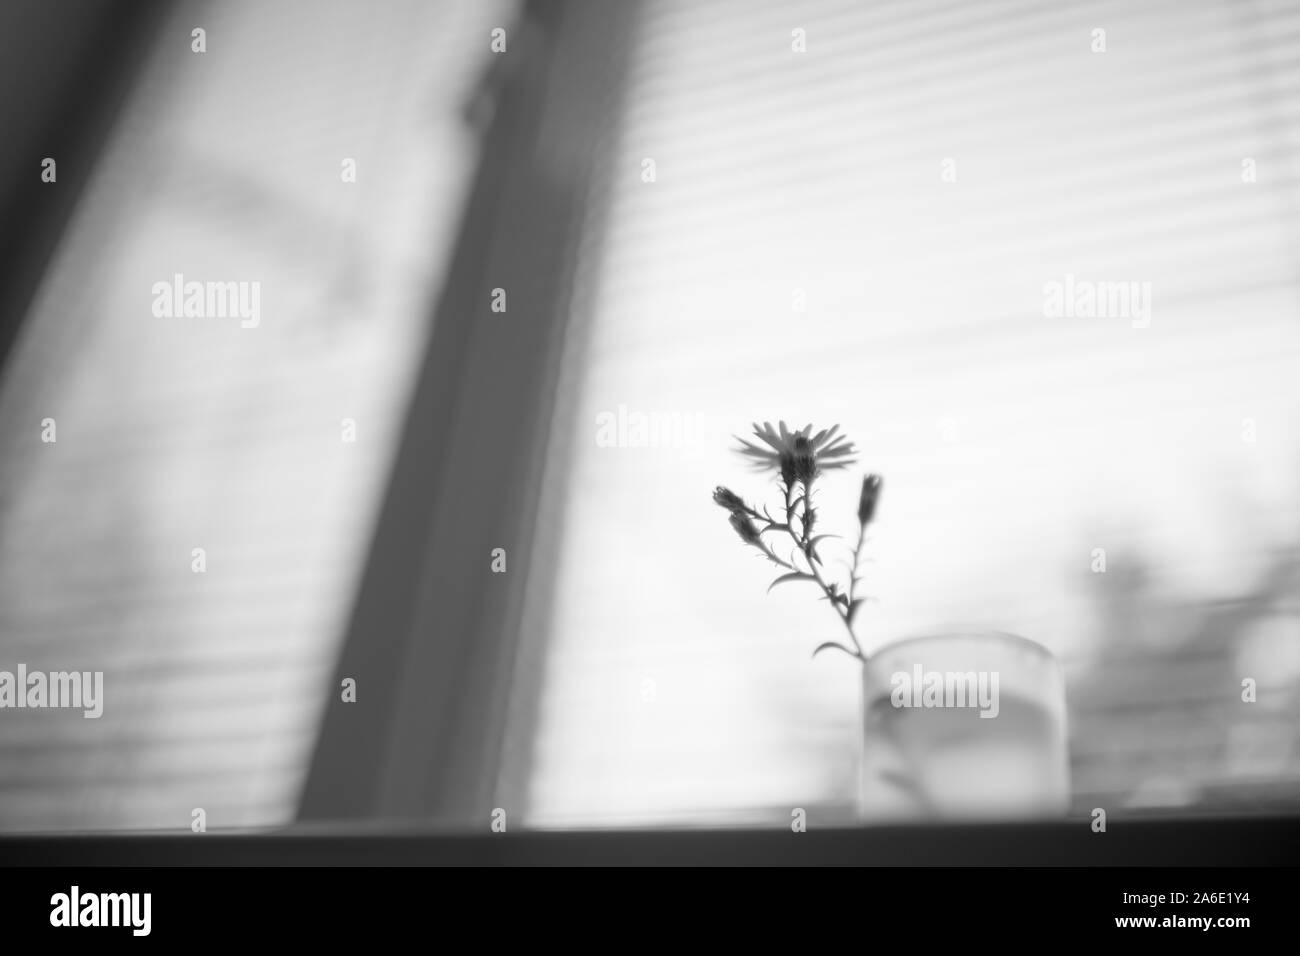 tender little flowers in a small vase, background light blurry window, bw Stock Photo